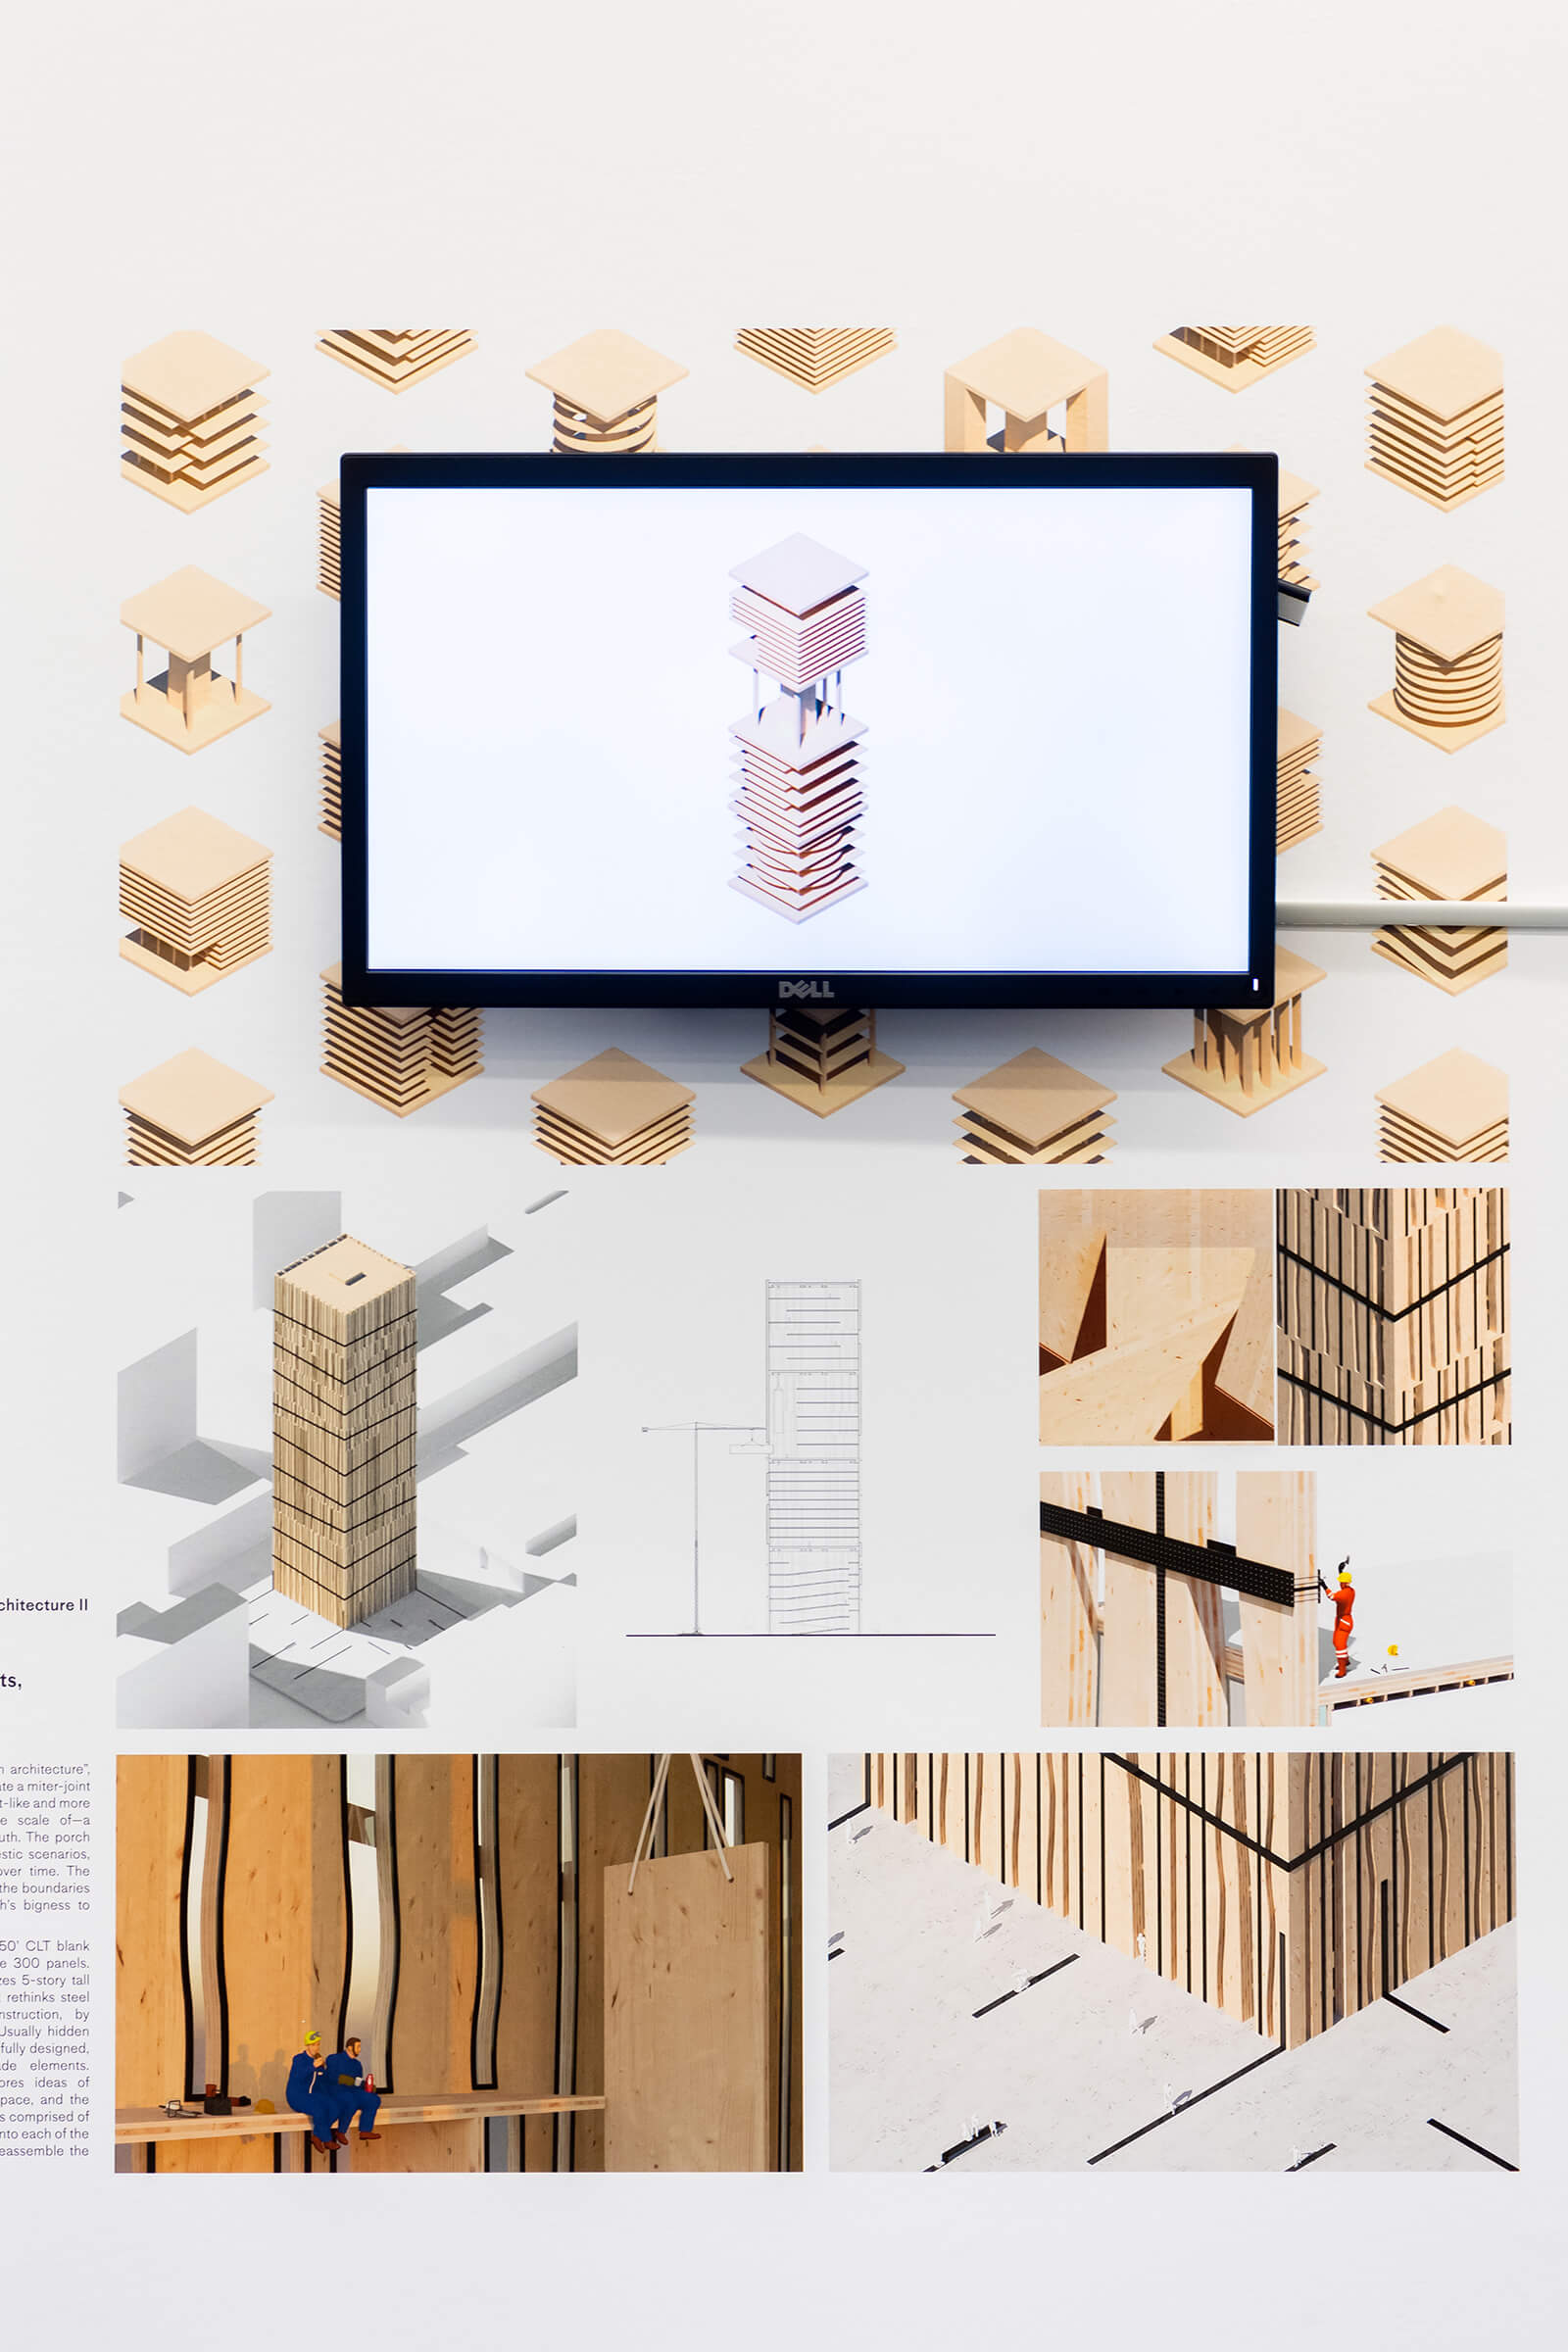 Exhibition wall with drawings of a skyscraper made of CLT and a screen showing an animation of the skyscraper.